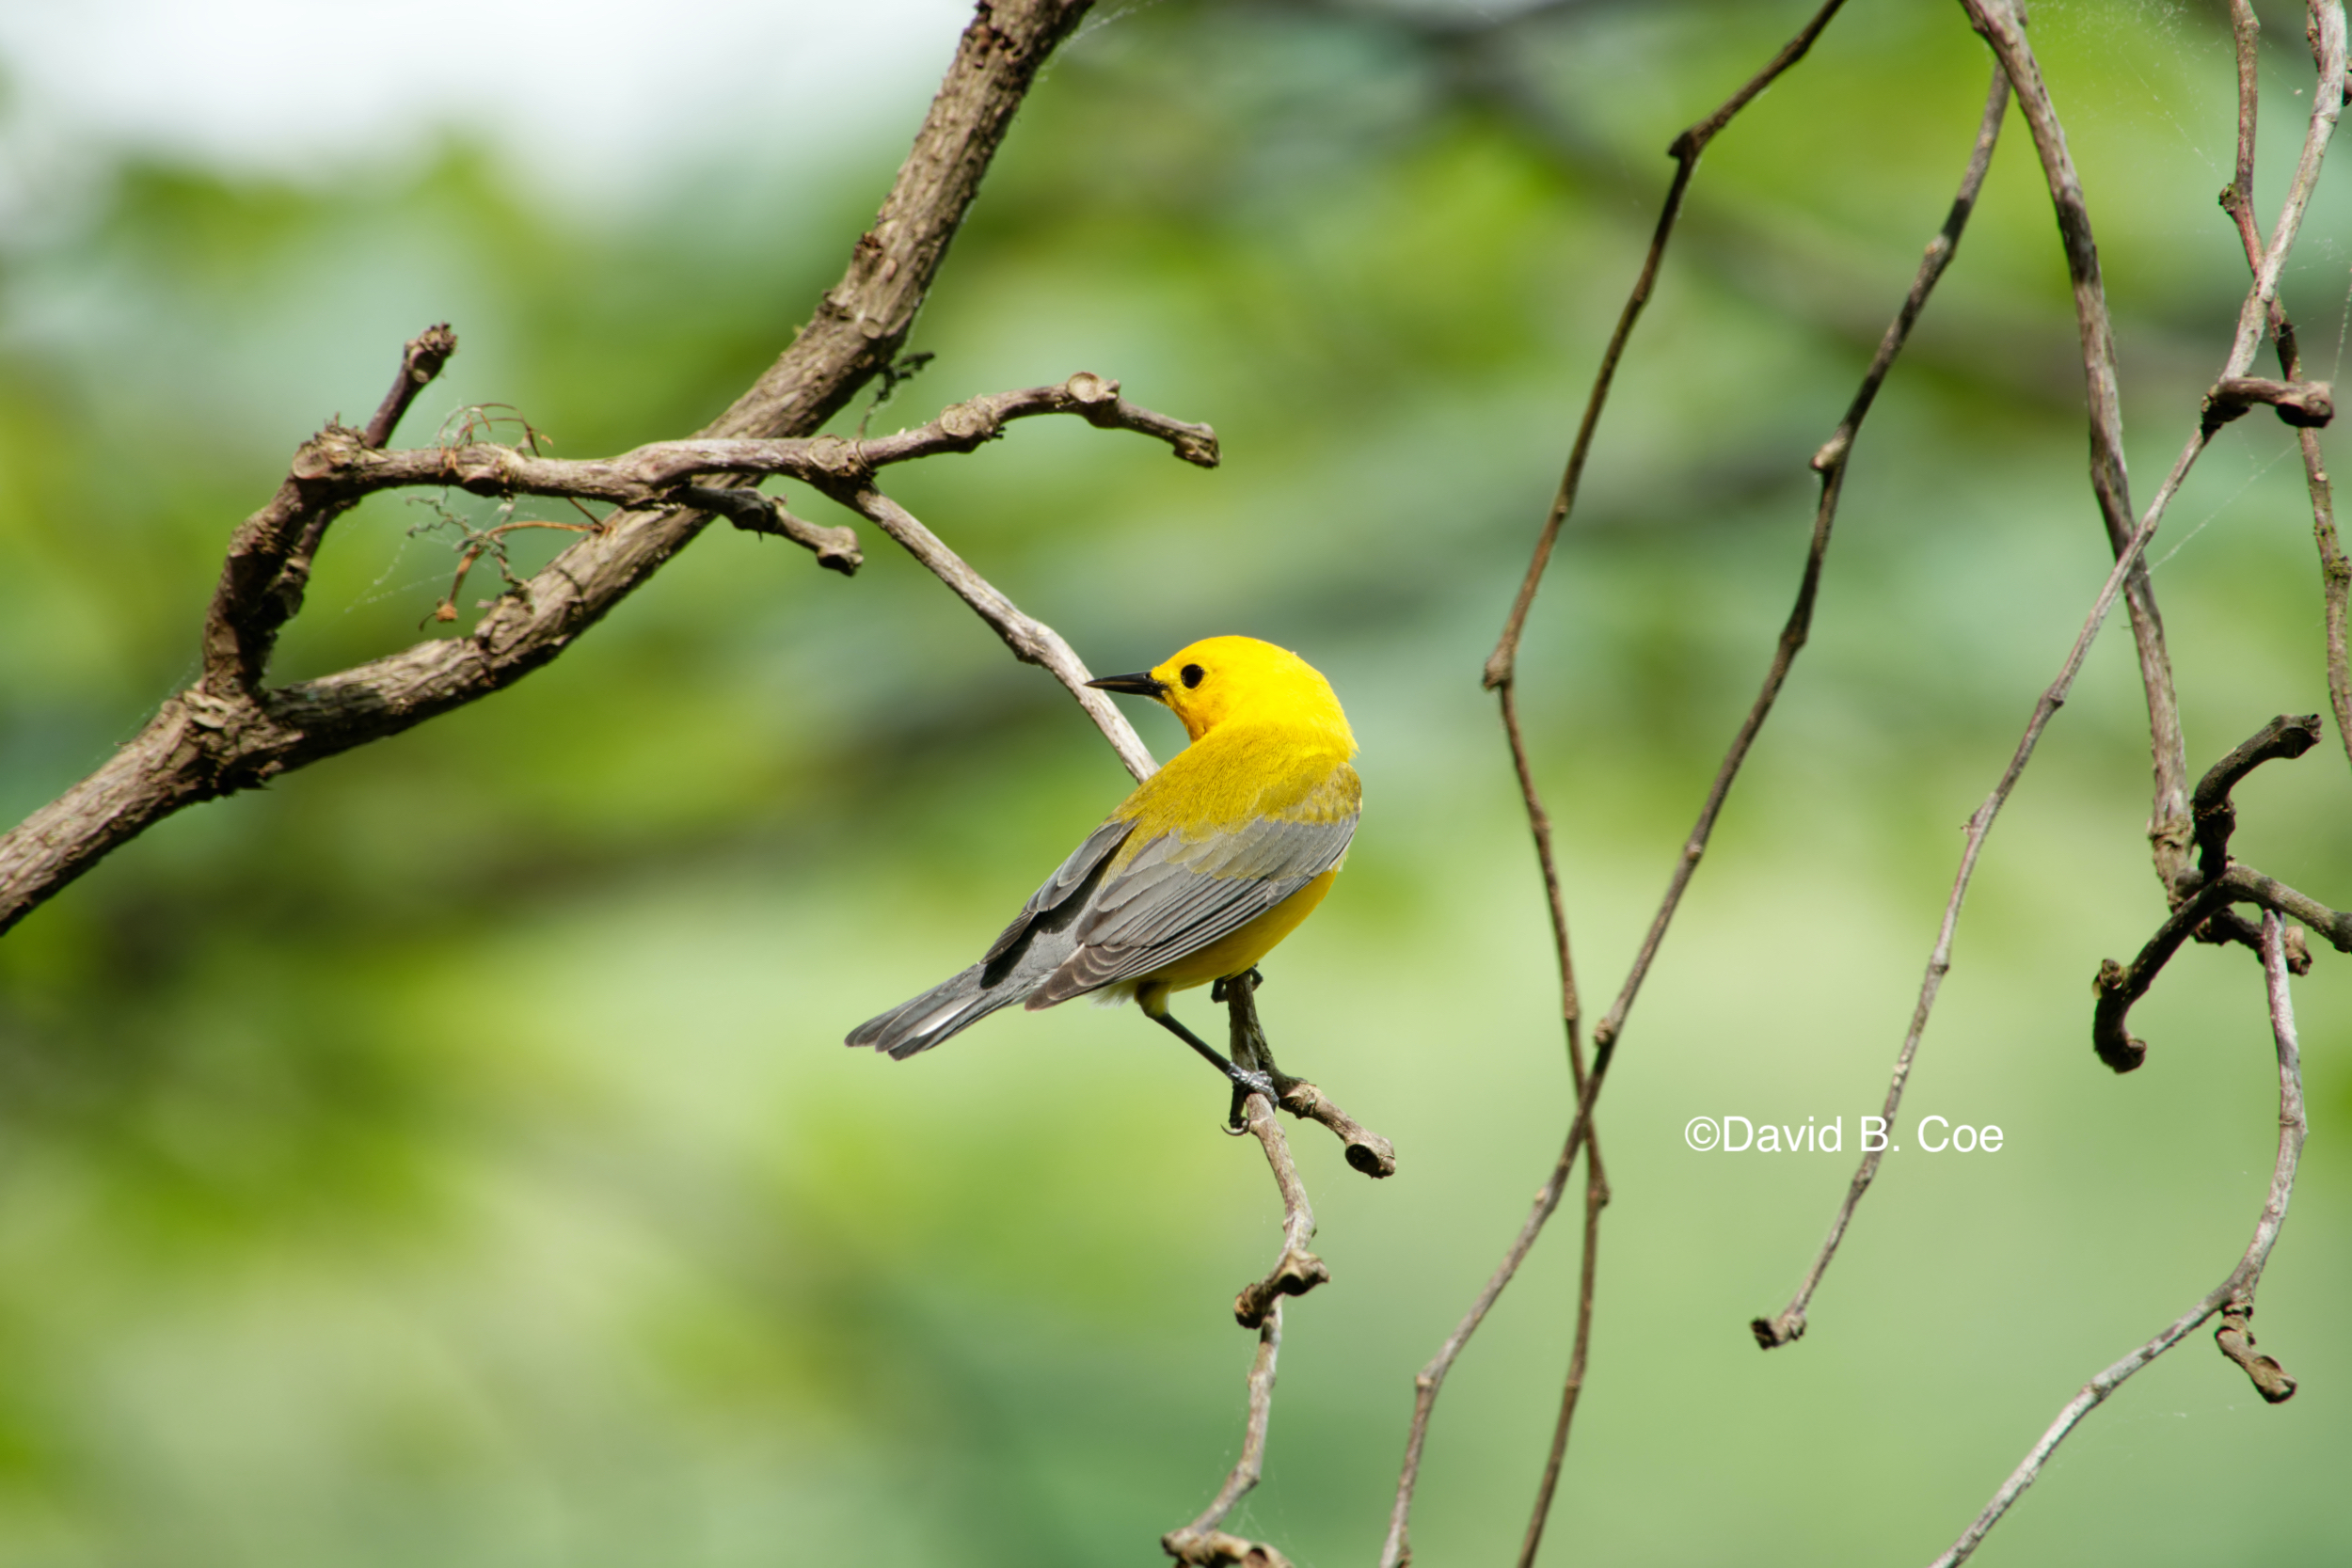 Prothonotary Warbler, by David B. Coe